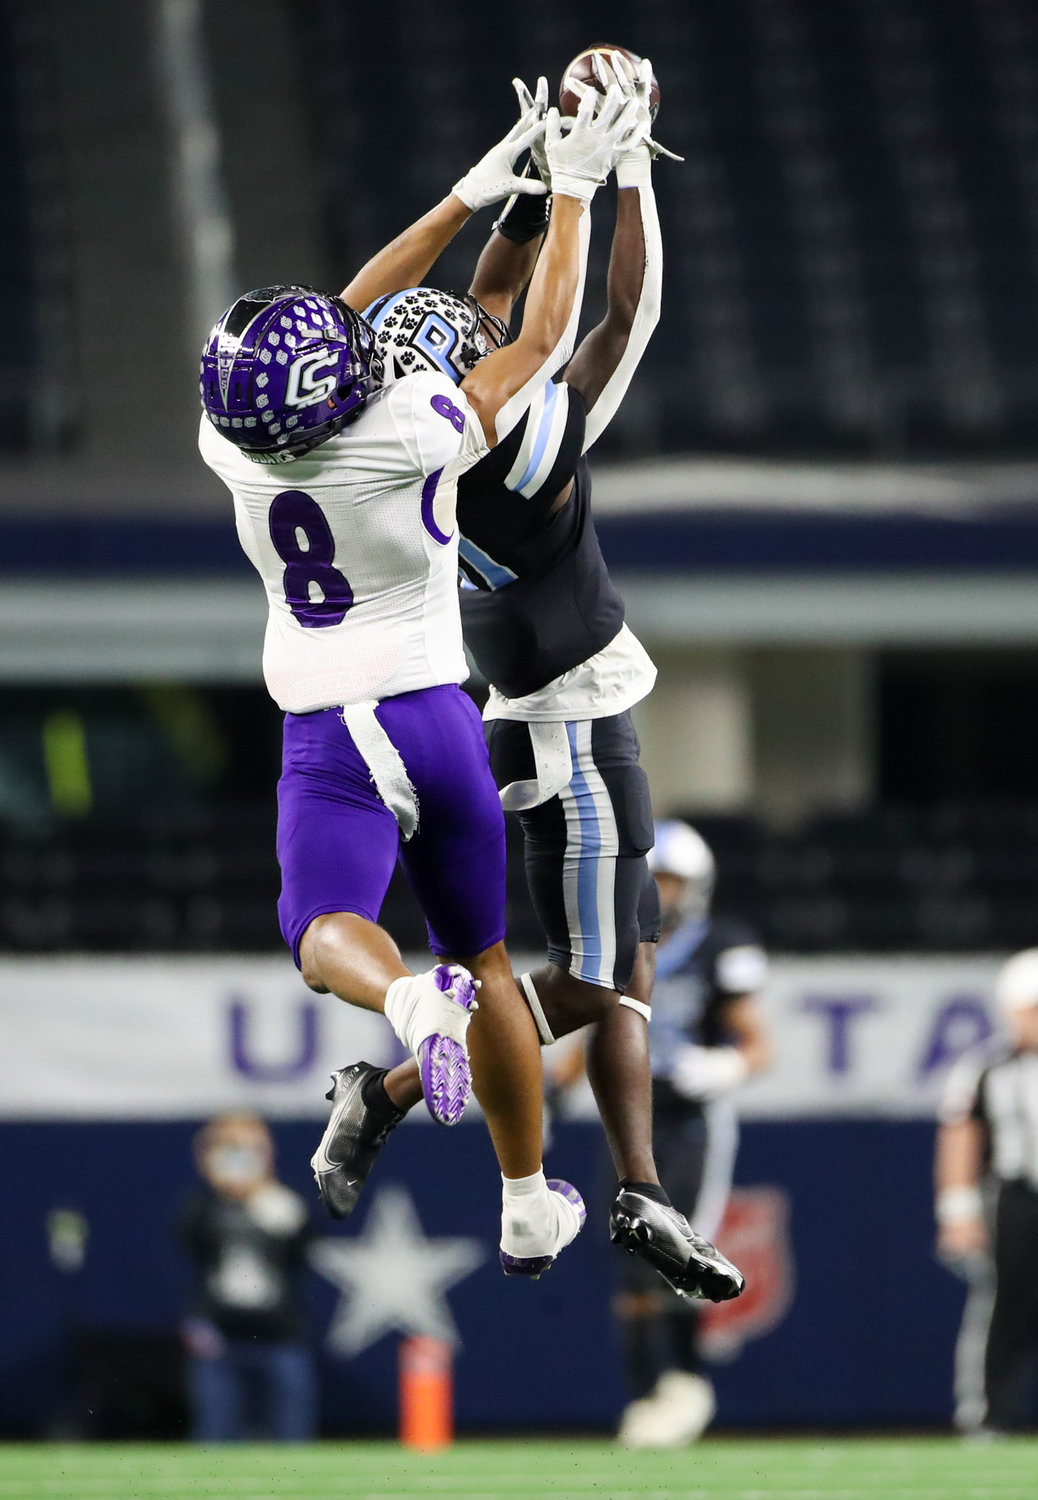 College Station Cougars defensive back Anthony Tisdell (8) knocks down a pass intended for Paetow Panthers wide receiver Kole Wilson (11) during the Class 5A Division I state football championship game between Paetow and College Station on December 17, 2021 in Arlington, Texas.